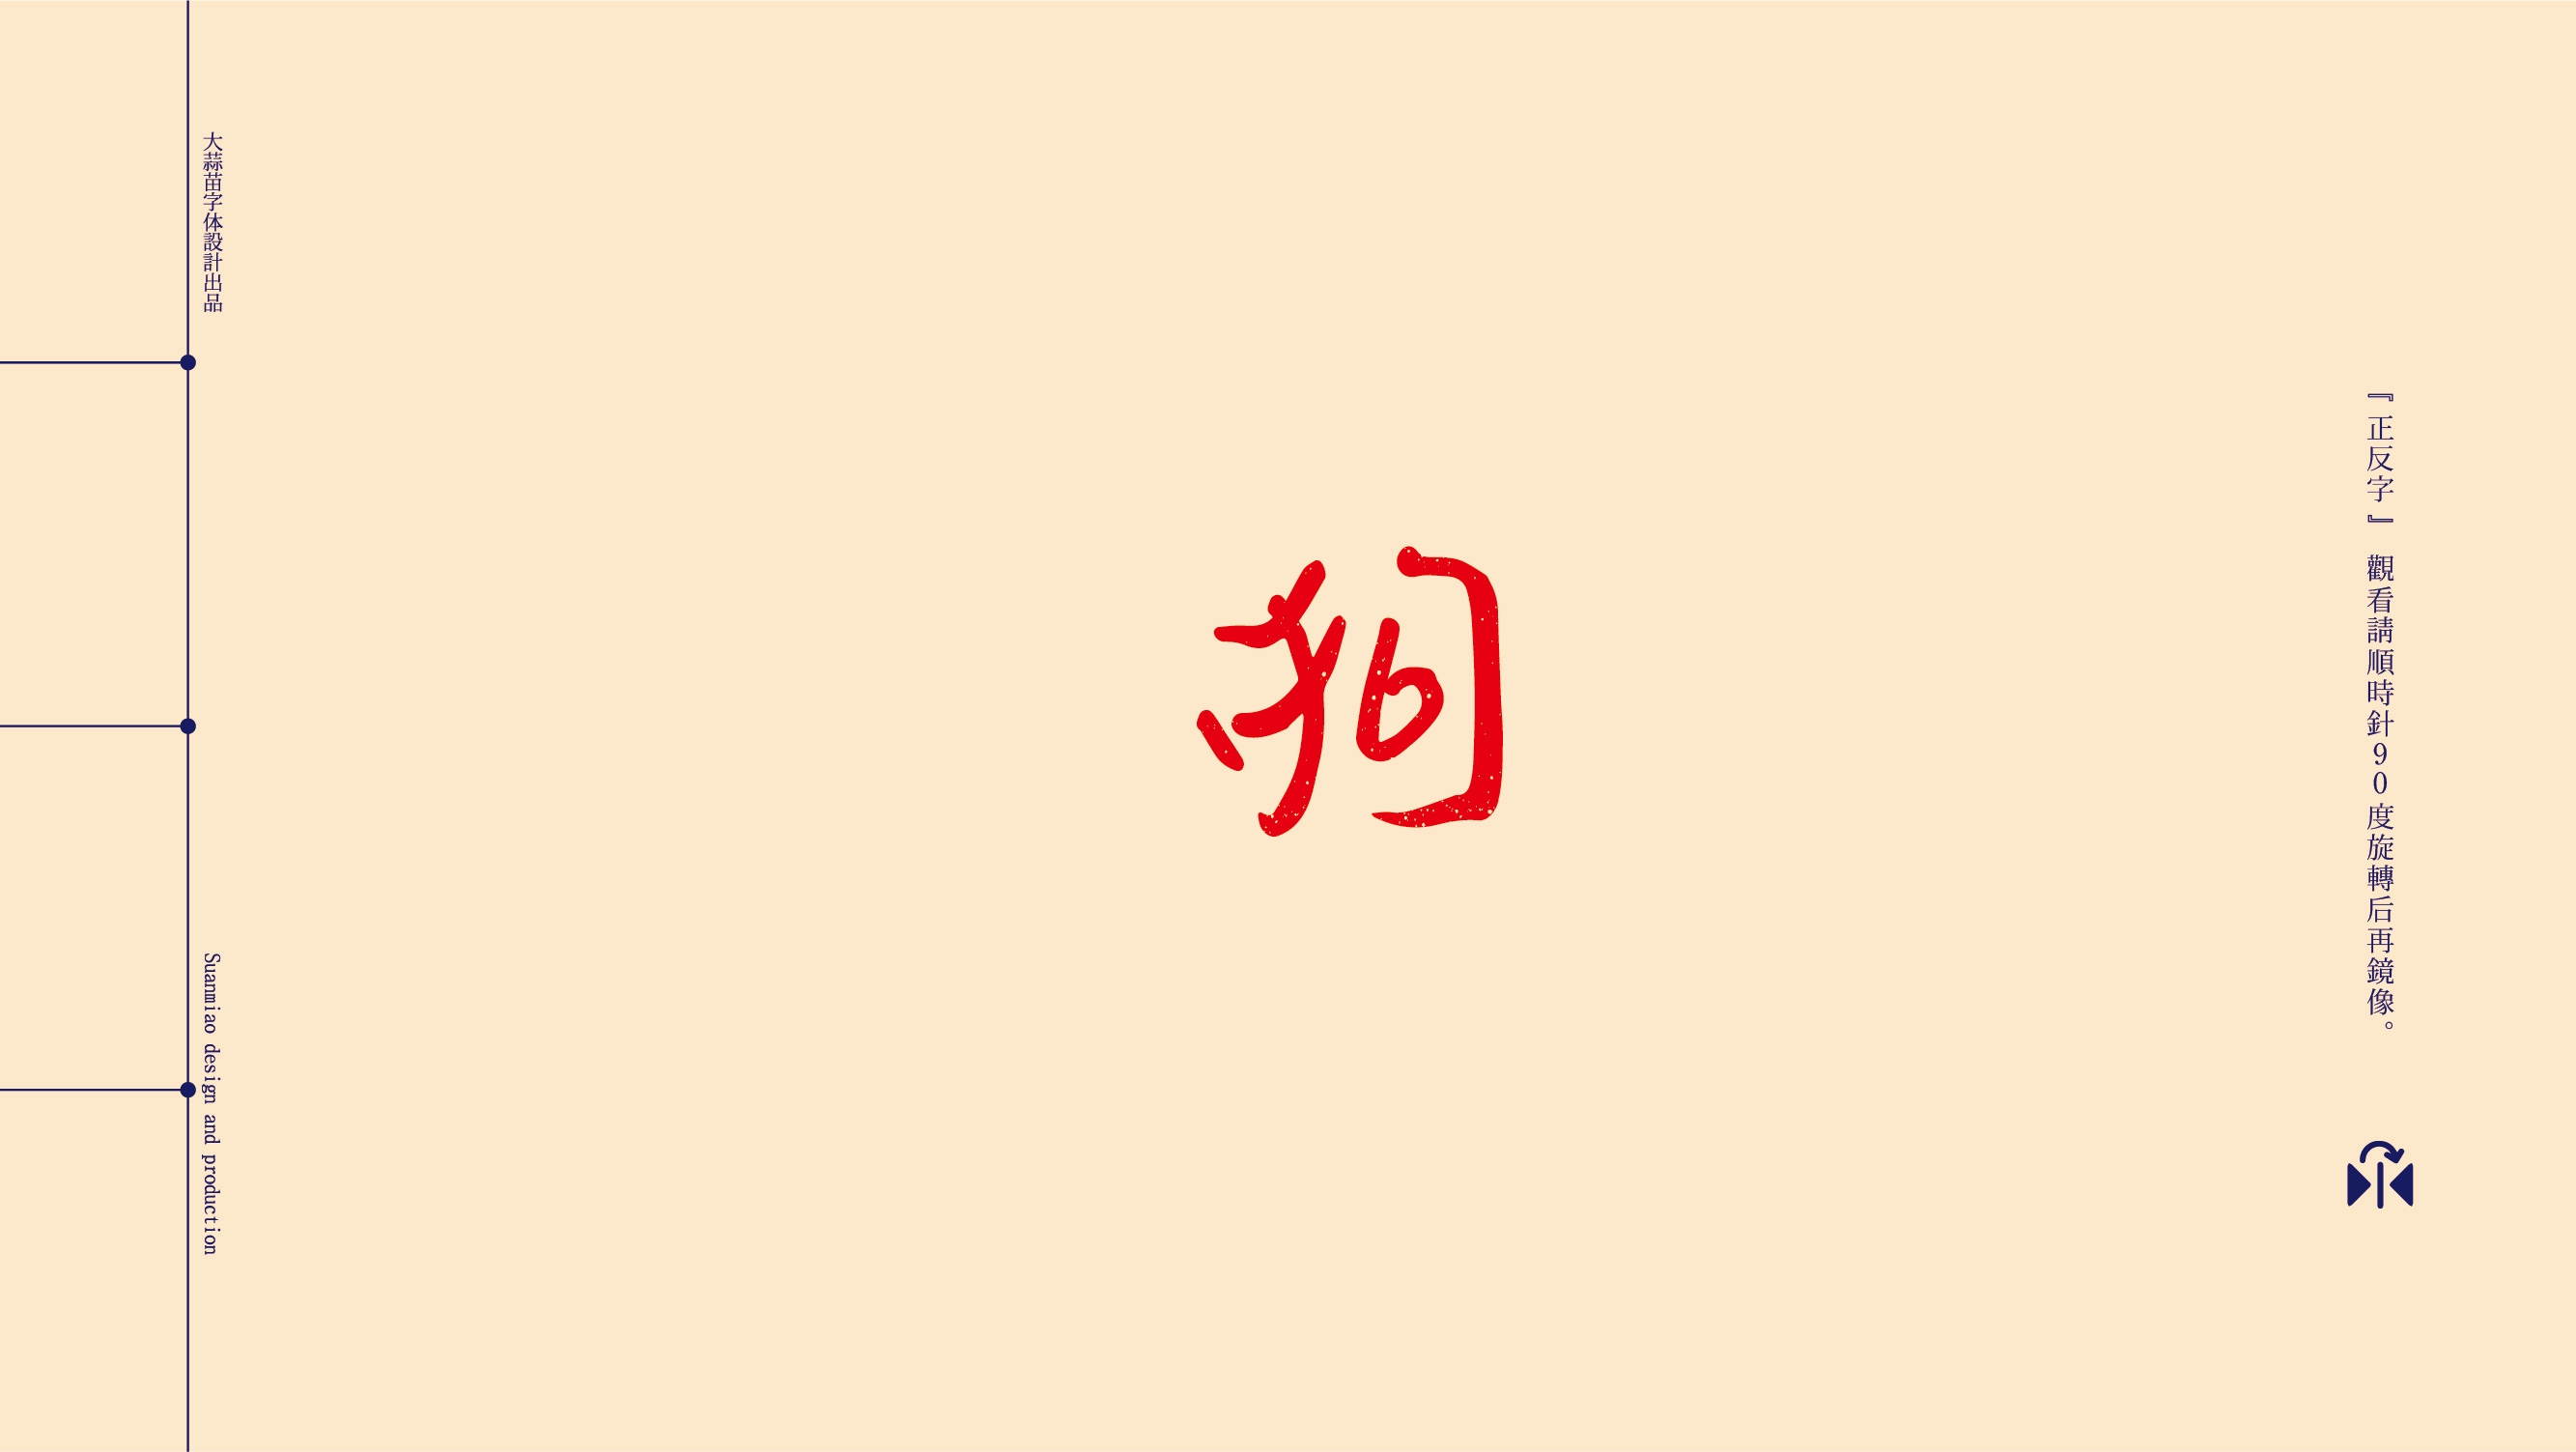 20P Collection of the latest Chinese font design schemes in 2021 #.166